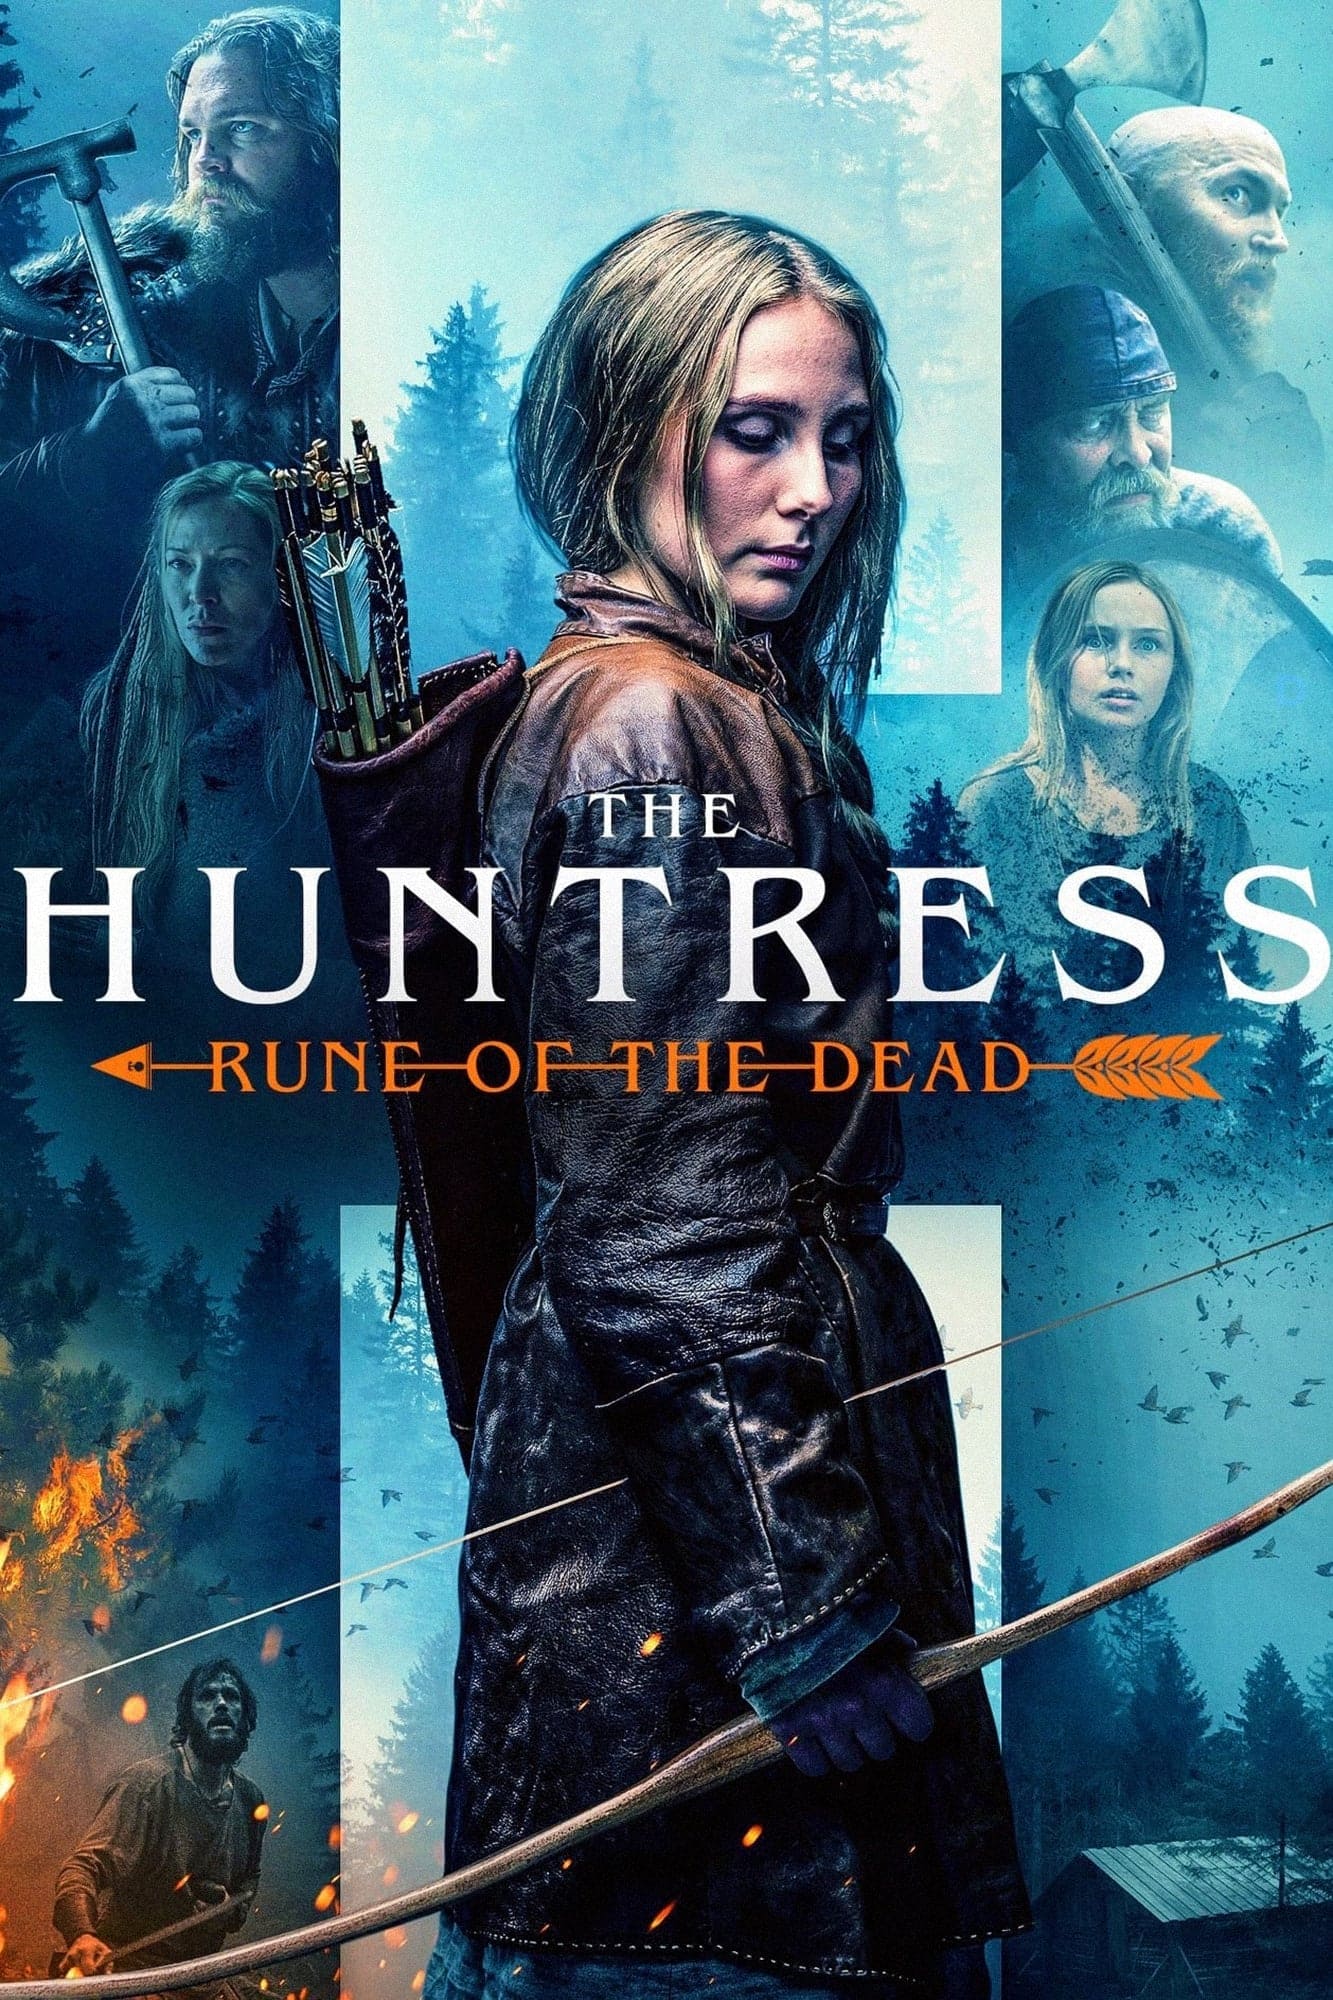 The Huntress: Rune of the Dead - assistir The Huntress: Rune of the Dead Dublado Online grátis